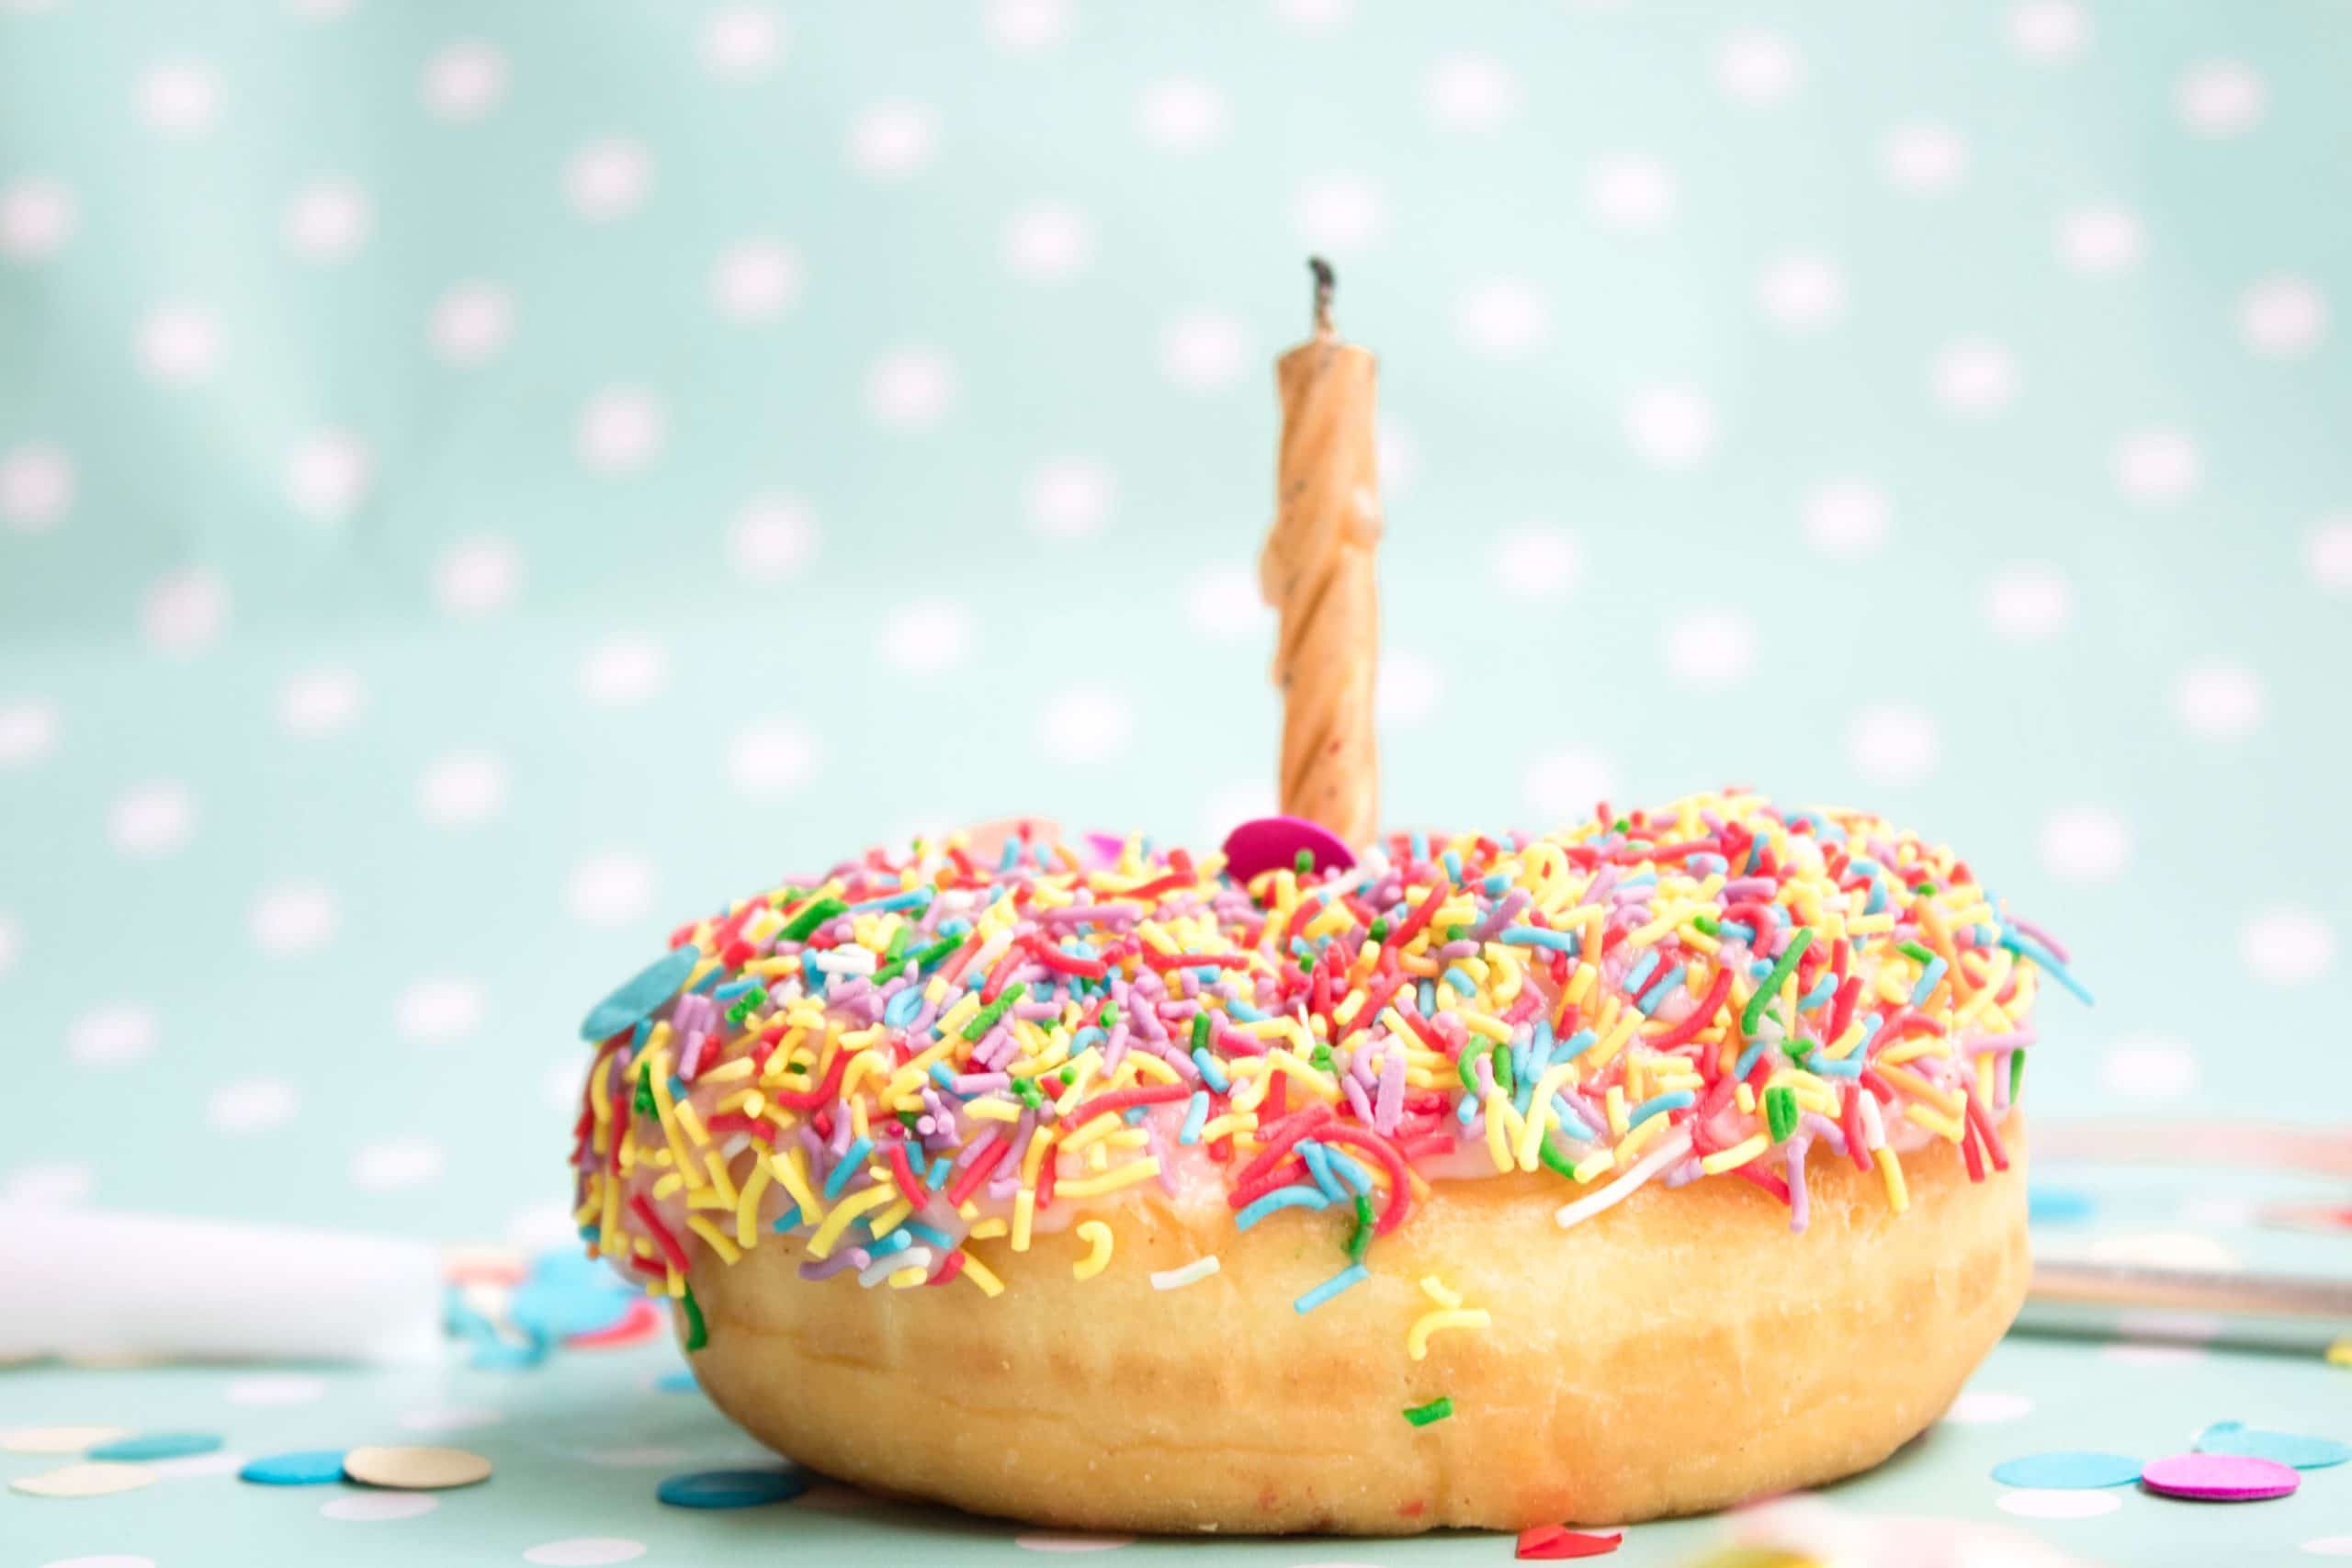 Sprinkle donut with a birthday candle - creative birthday traditions 